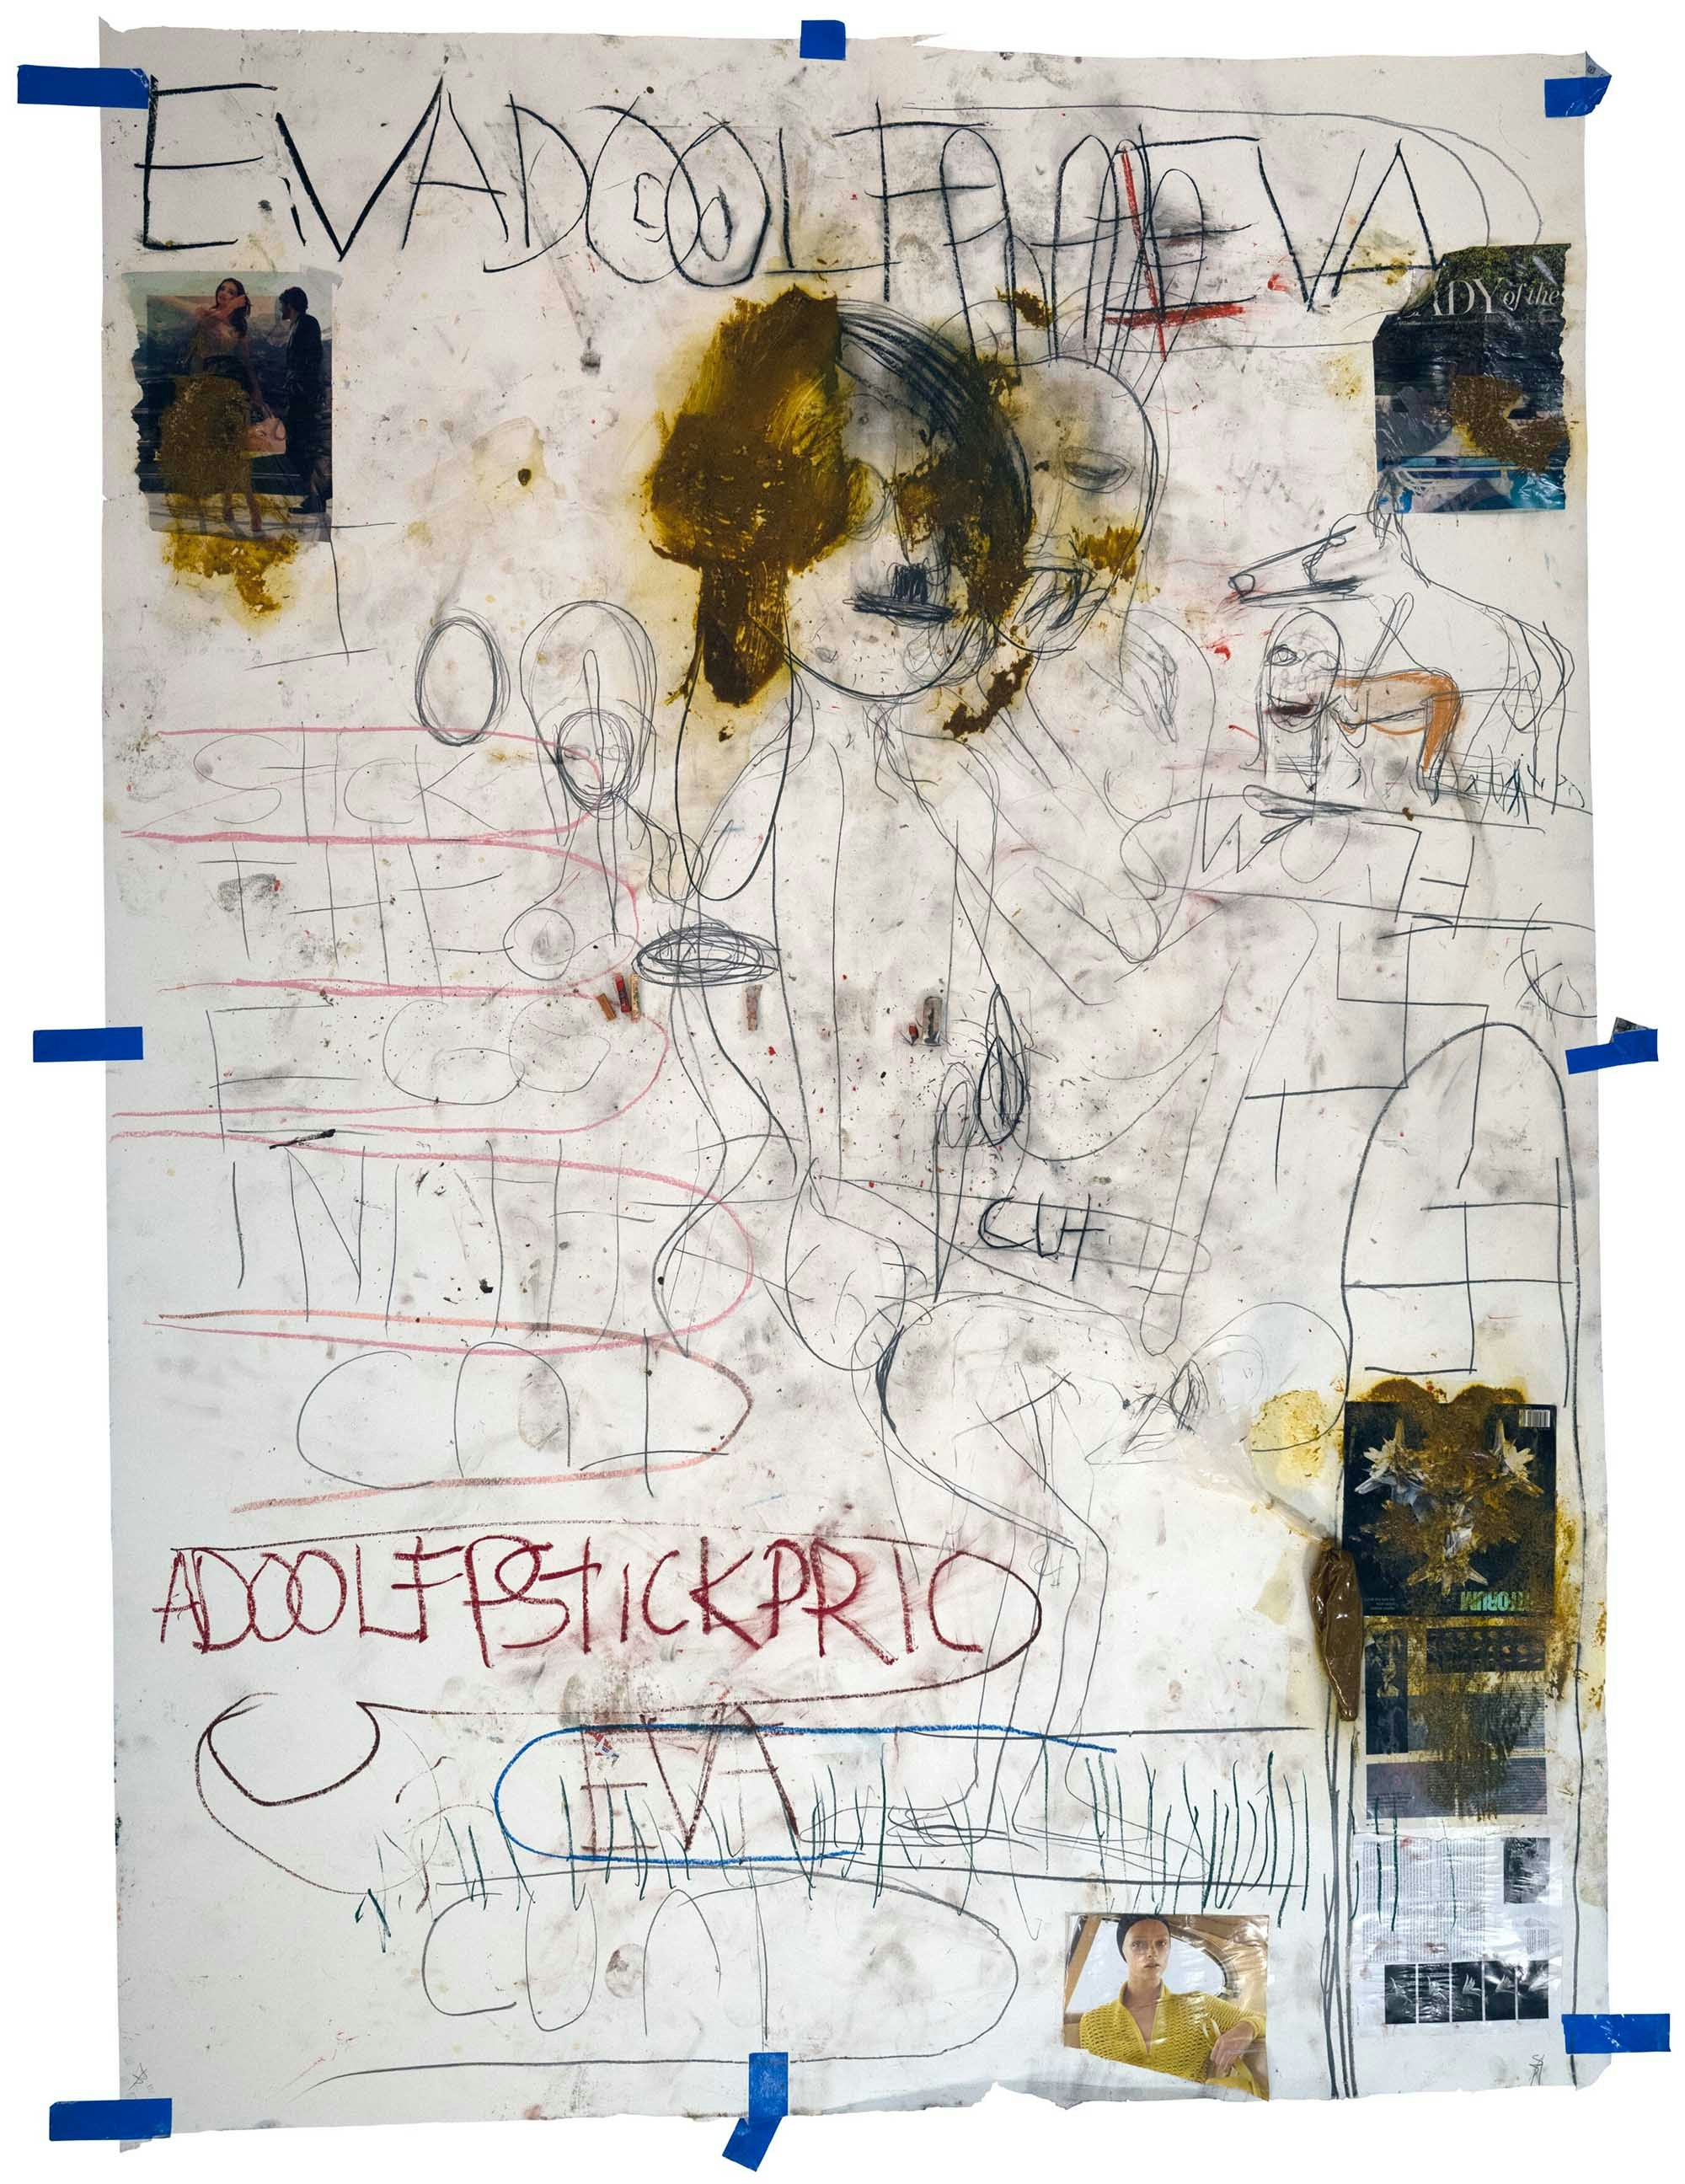 Paul McCarthy, <em>A&E, EVADOOLF EVA, Santa Anita session</em>, 2020. Charcoal, pastel, mixed media, and collage on paper, 104 1/4 x 78 1/2 inches. © Paul McCarthy. Courtesy the artist and Hauser & Wirth. Photo: Fredrik Nilsen.